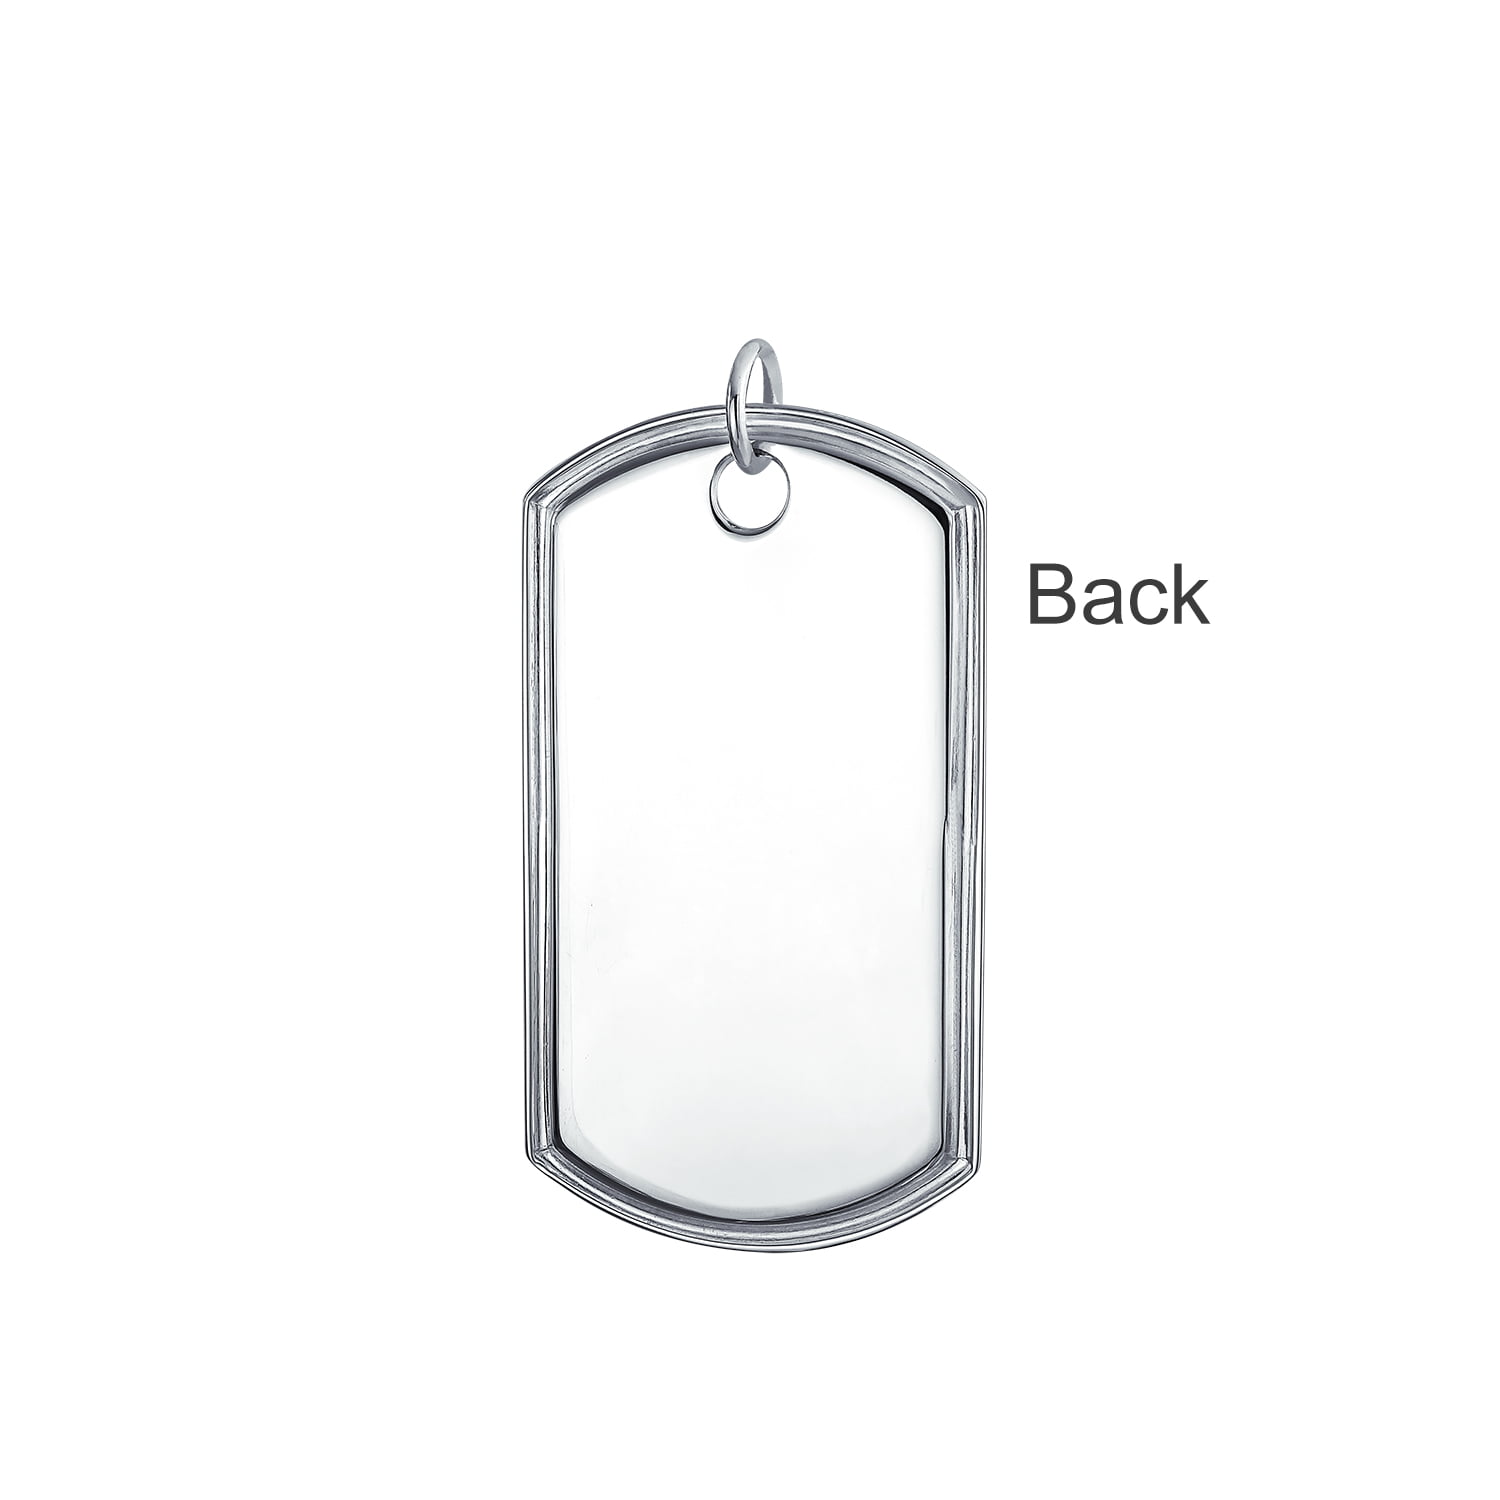 25 Pack Military Blank Dog Tags Wholesale With Laser Engraving And 24 Inch  Stainless Steel Ball Chain In Silver From Kukuson, $18.07